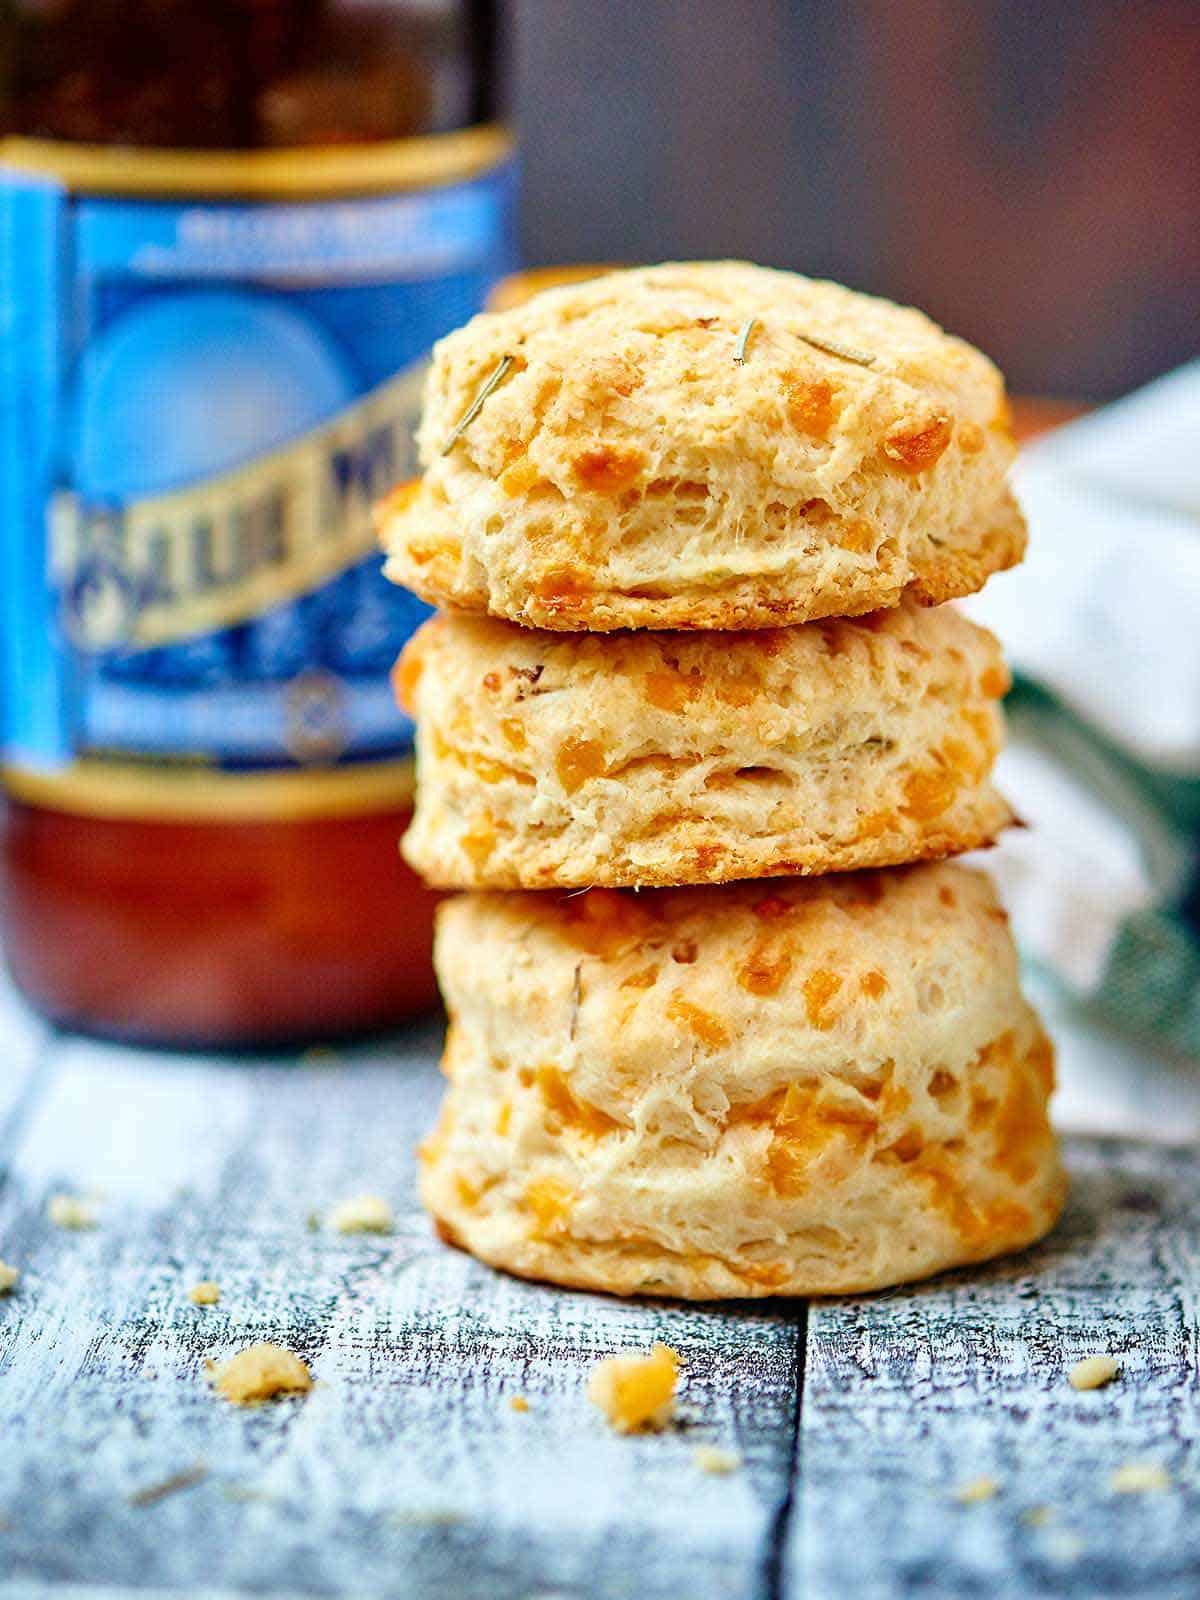 Roasted Garlic Cheddar Beer Biscuits - w/ Rosemary